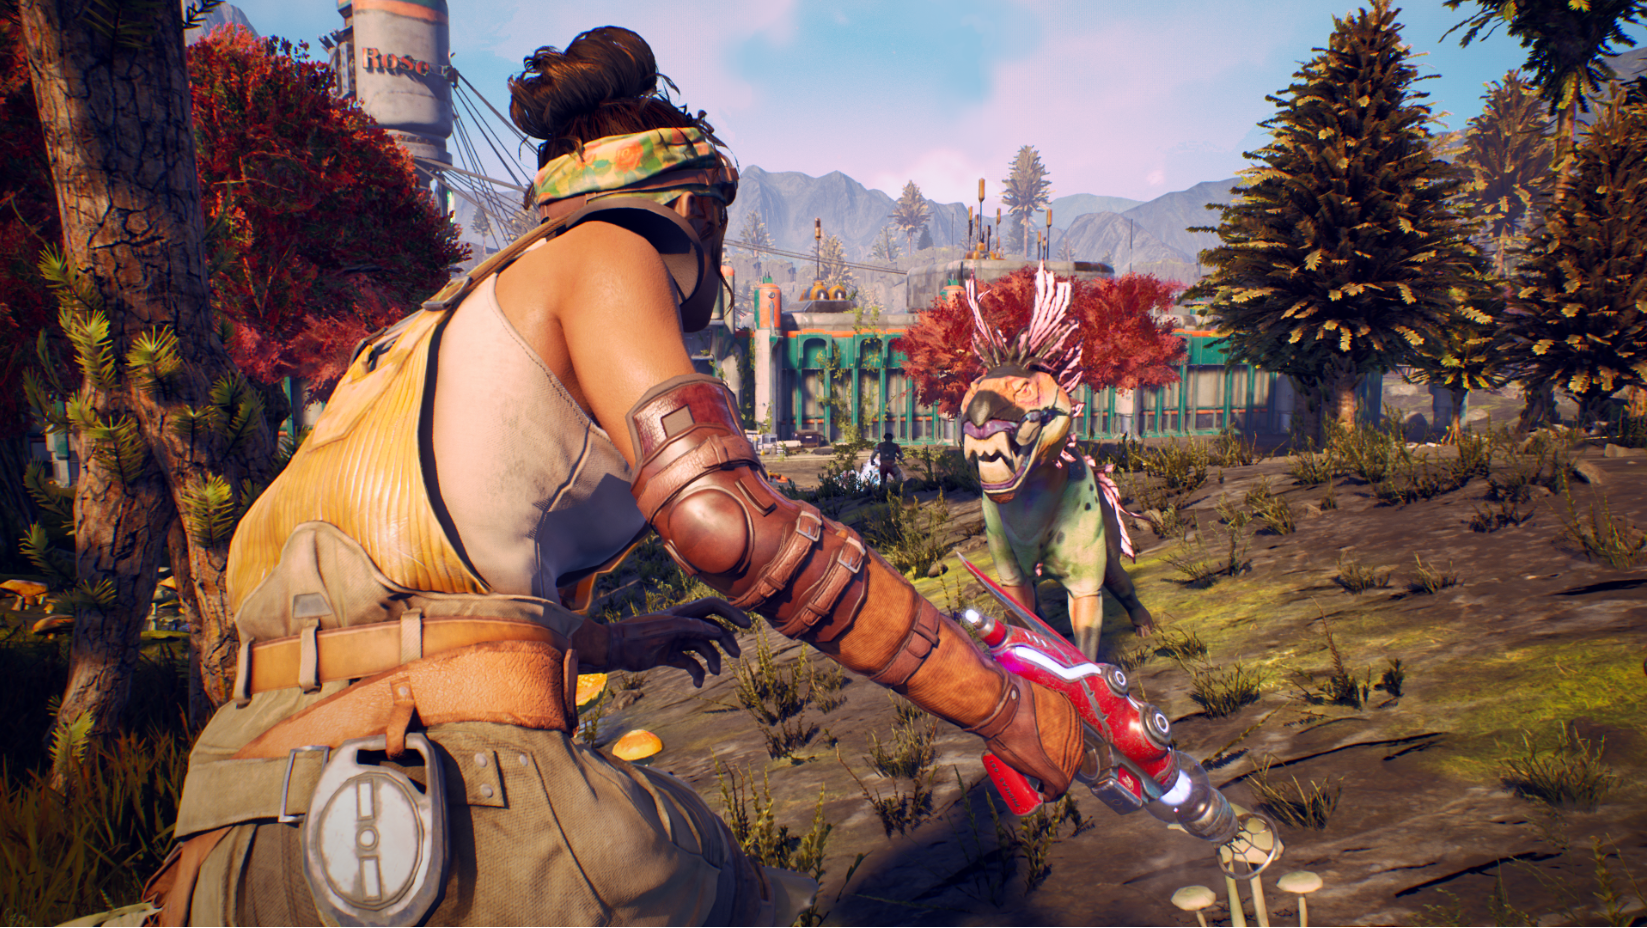 The Outer Worlds Interview — Developer Talks Role Playing, Exploration, and Quests